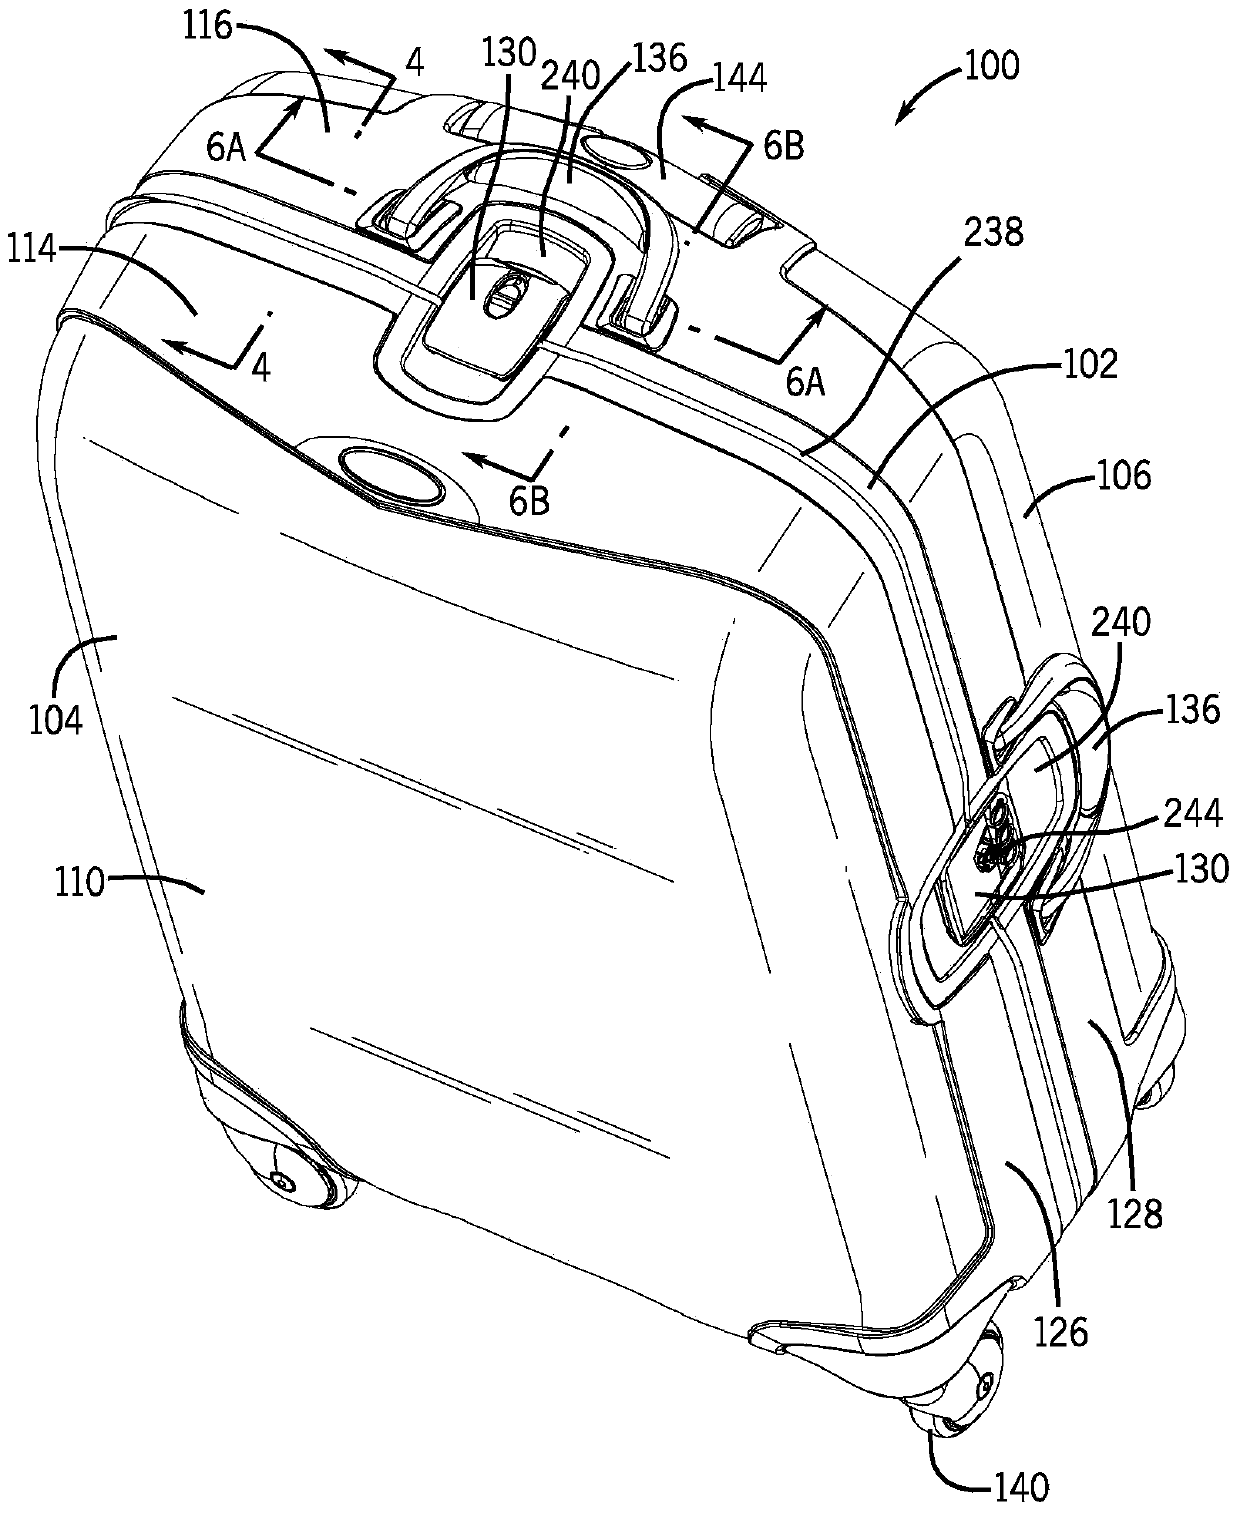 Luggage with case, frame and lock